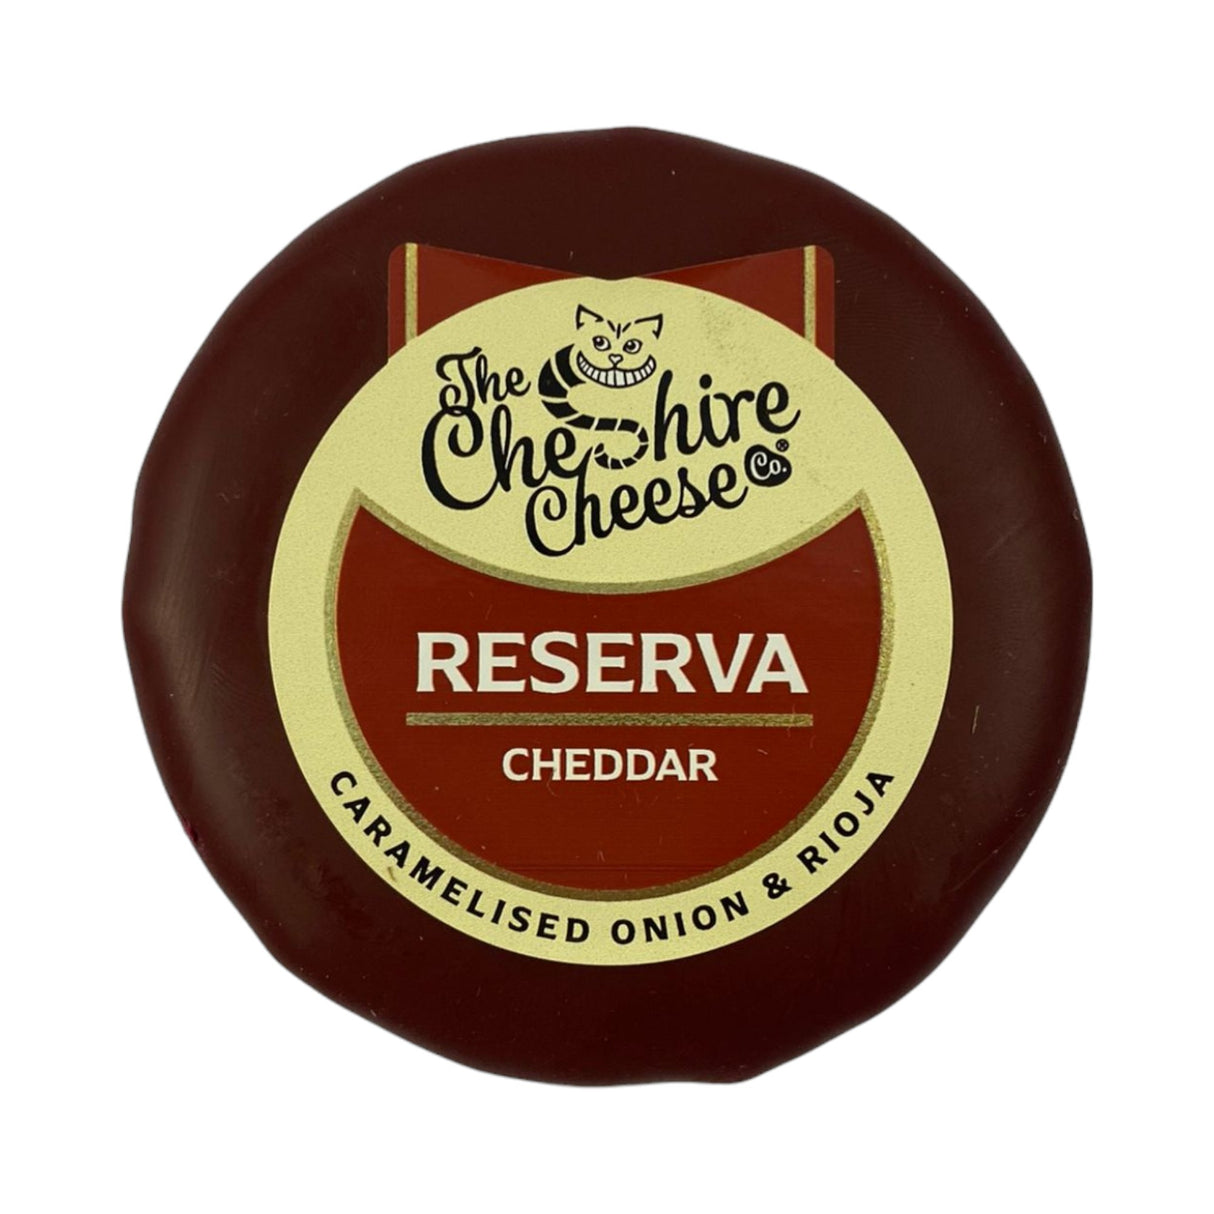 Cheshire Cheese - Reserva Cheddar 200g